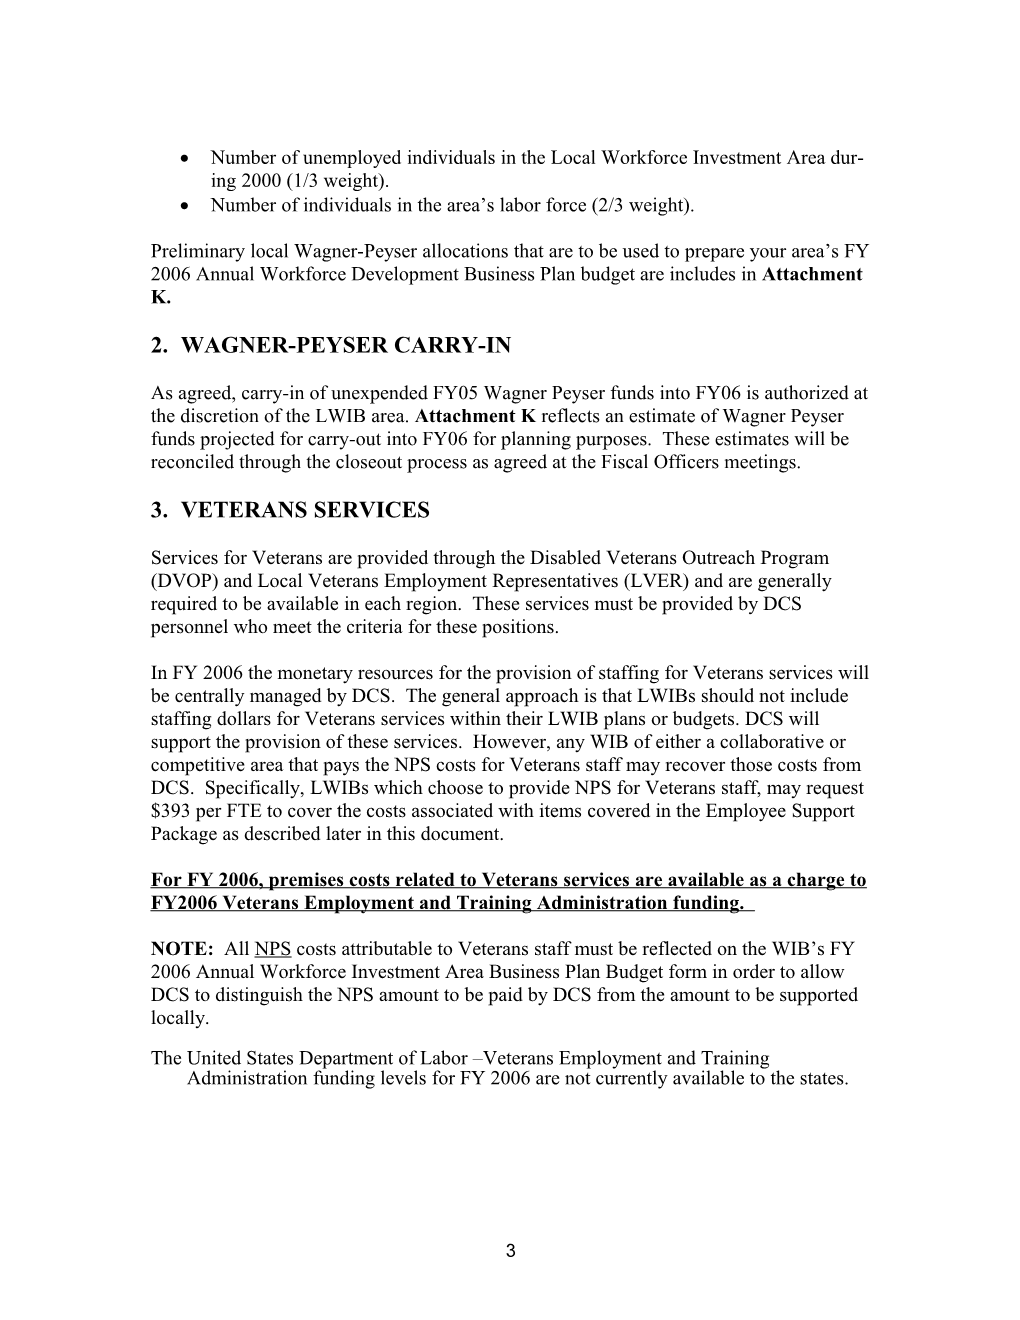 05-27 Attachment I Business Plan Budget Instructions